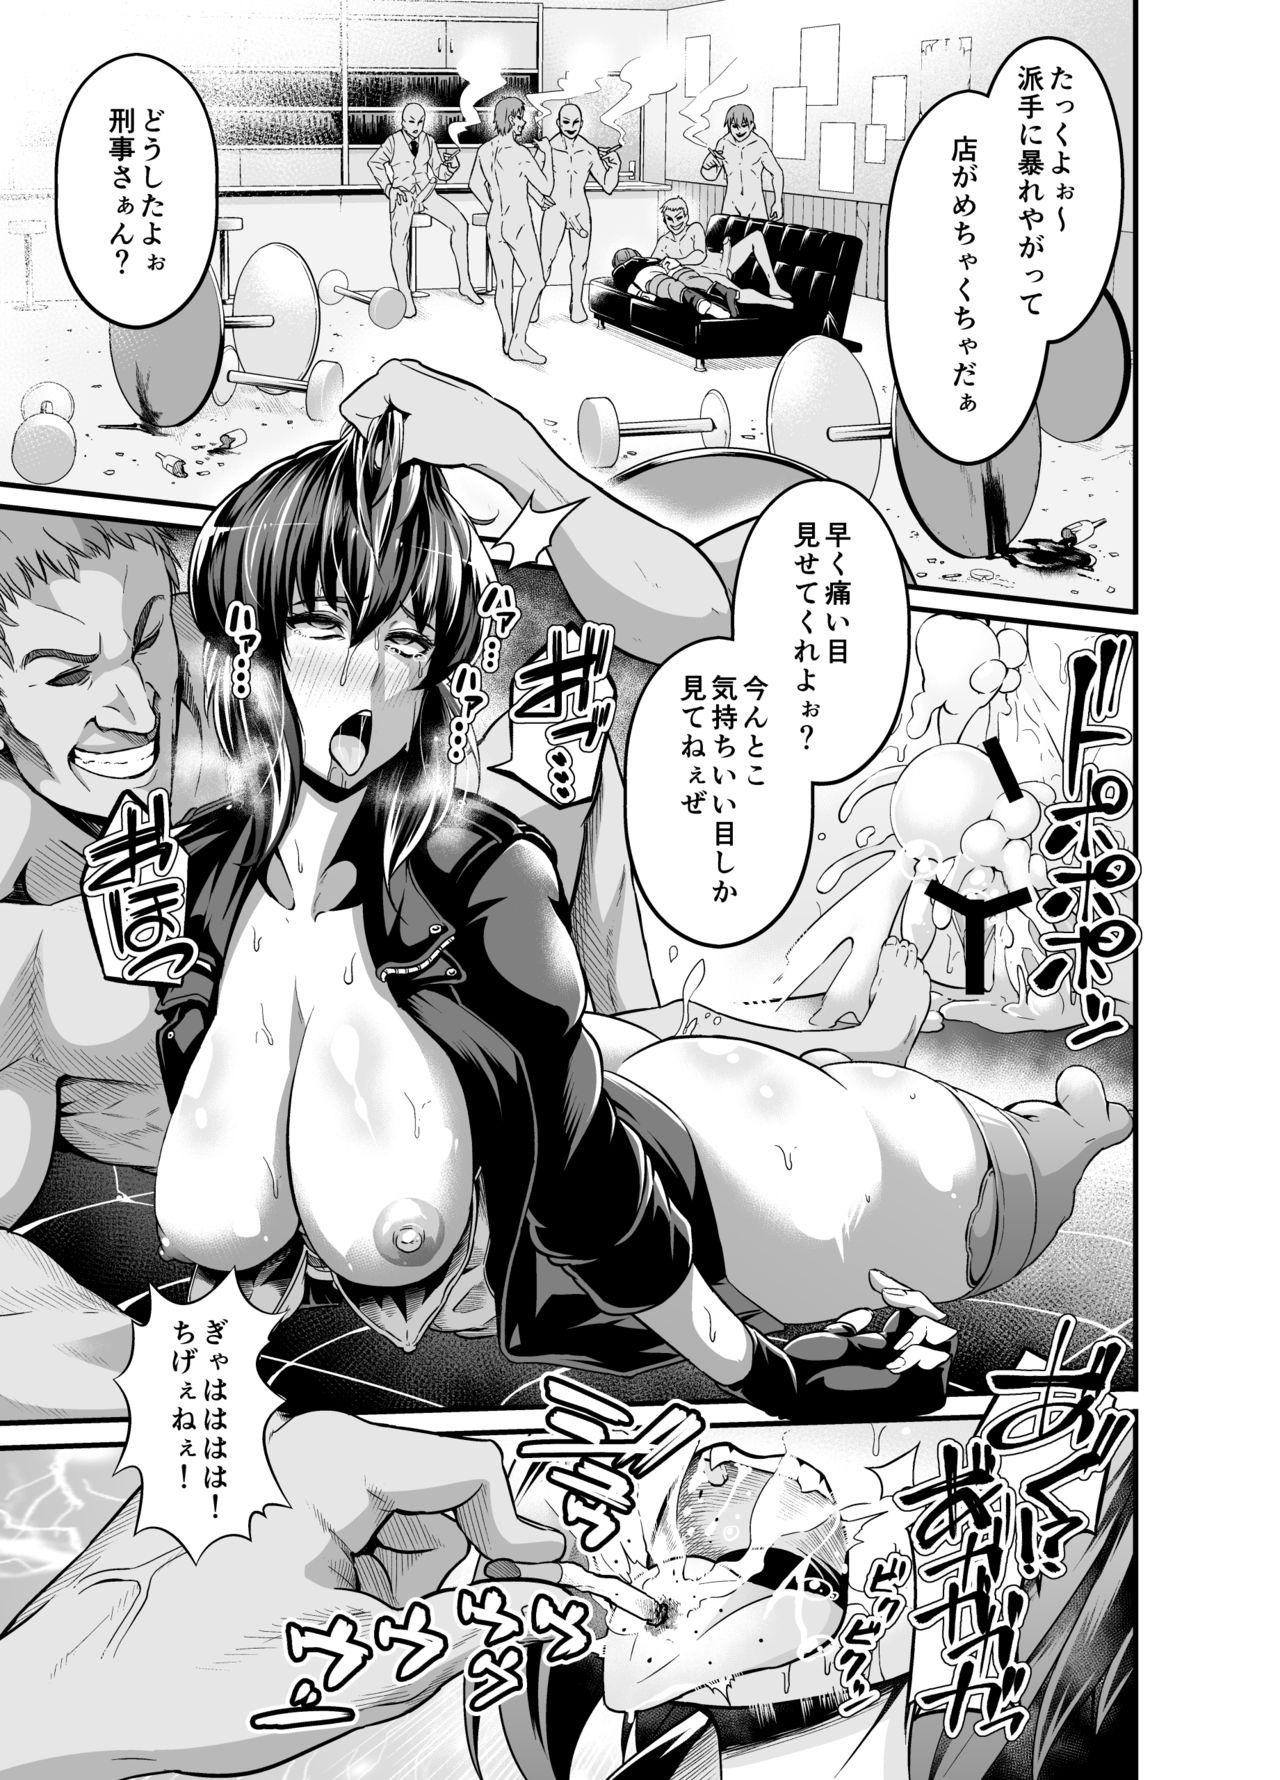 Bathroom SSS 14.5 - Ghost in the shell Female - Page 6